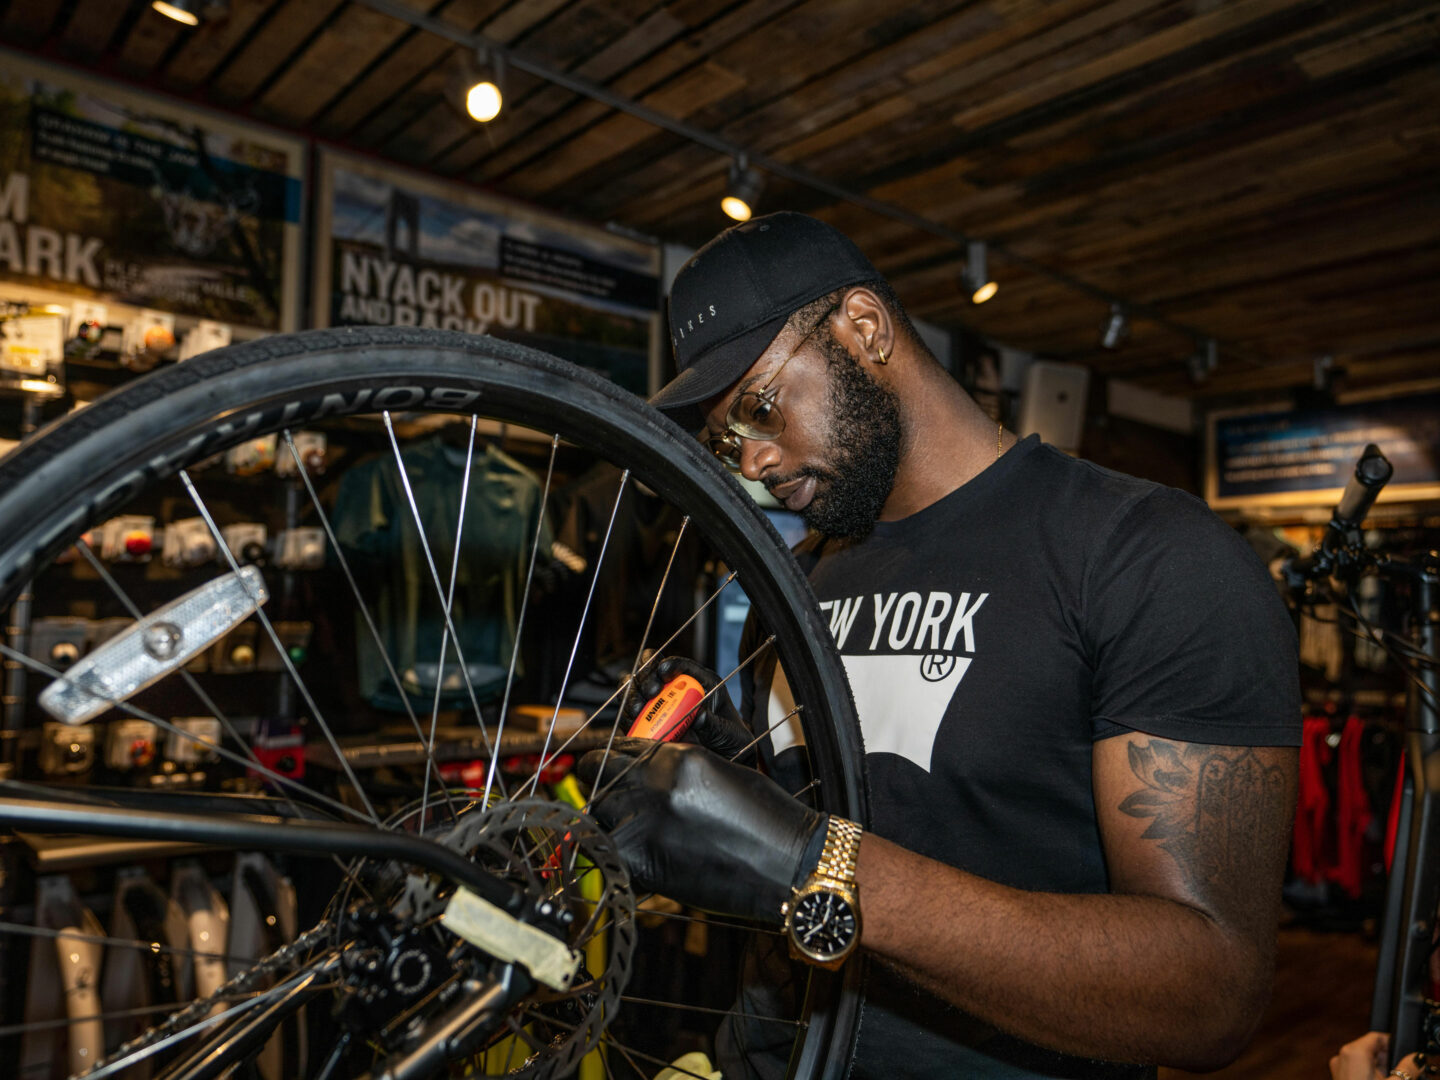 A young Black man works on a bicycle in a bike shop.